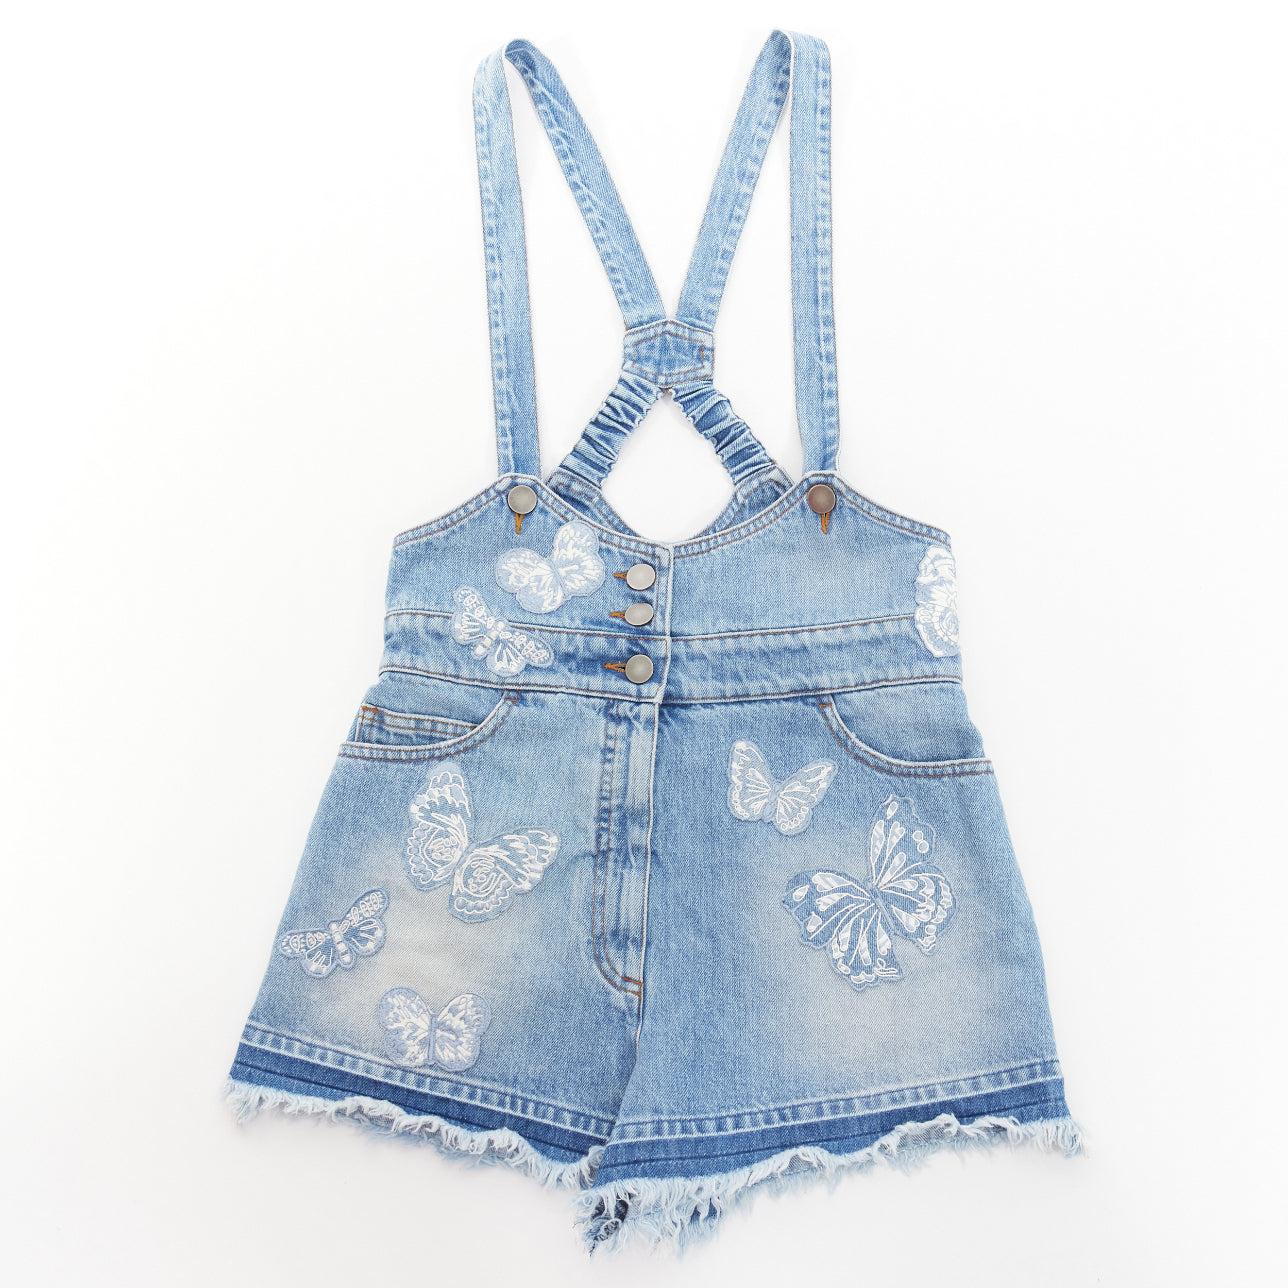 Women's VALENTINO washed denim white butterfly patch suspender dungaree shorts 25